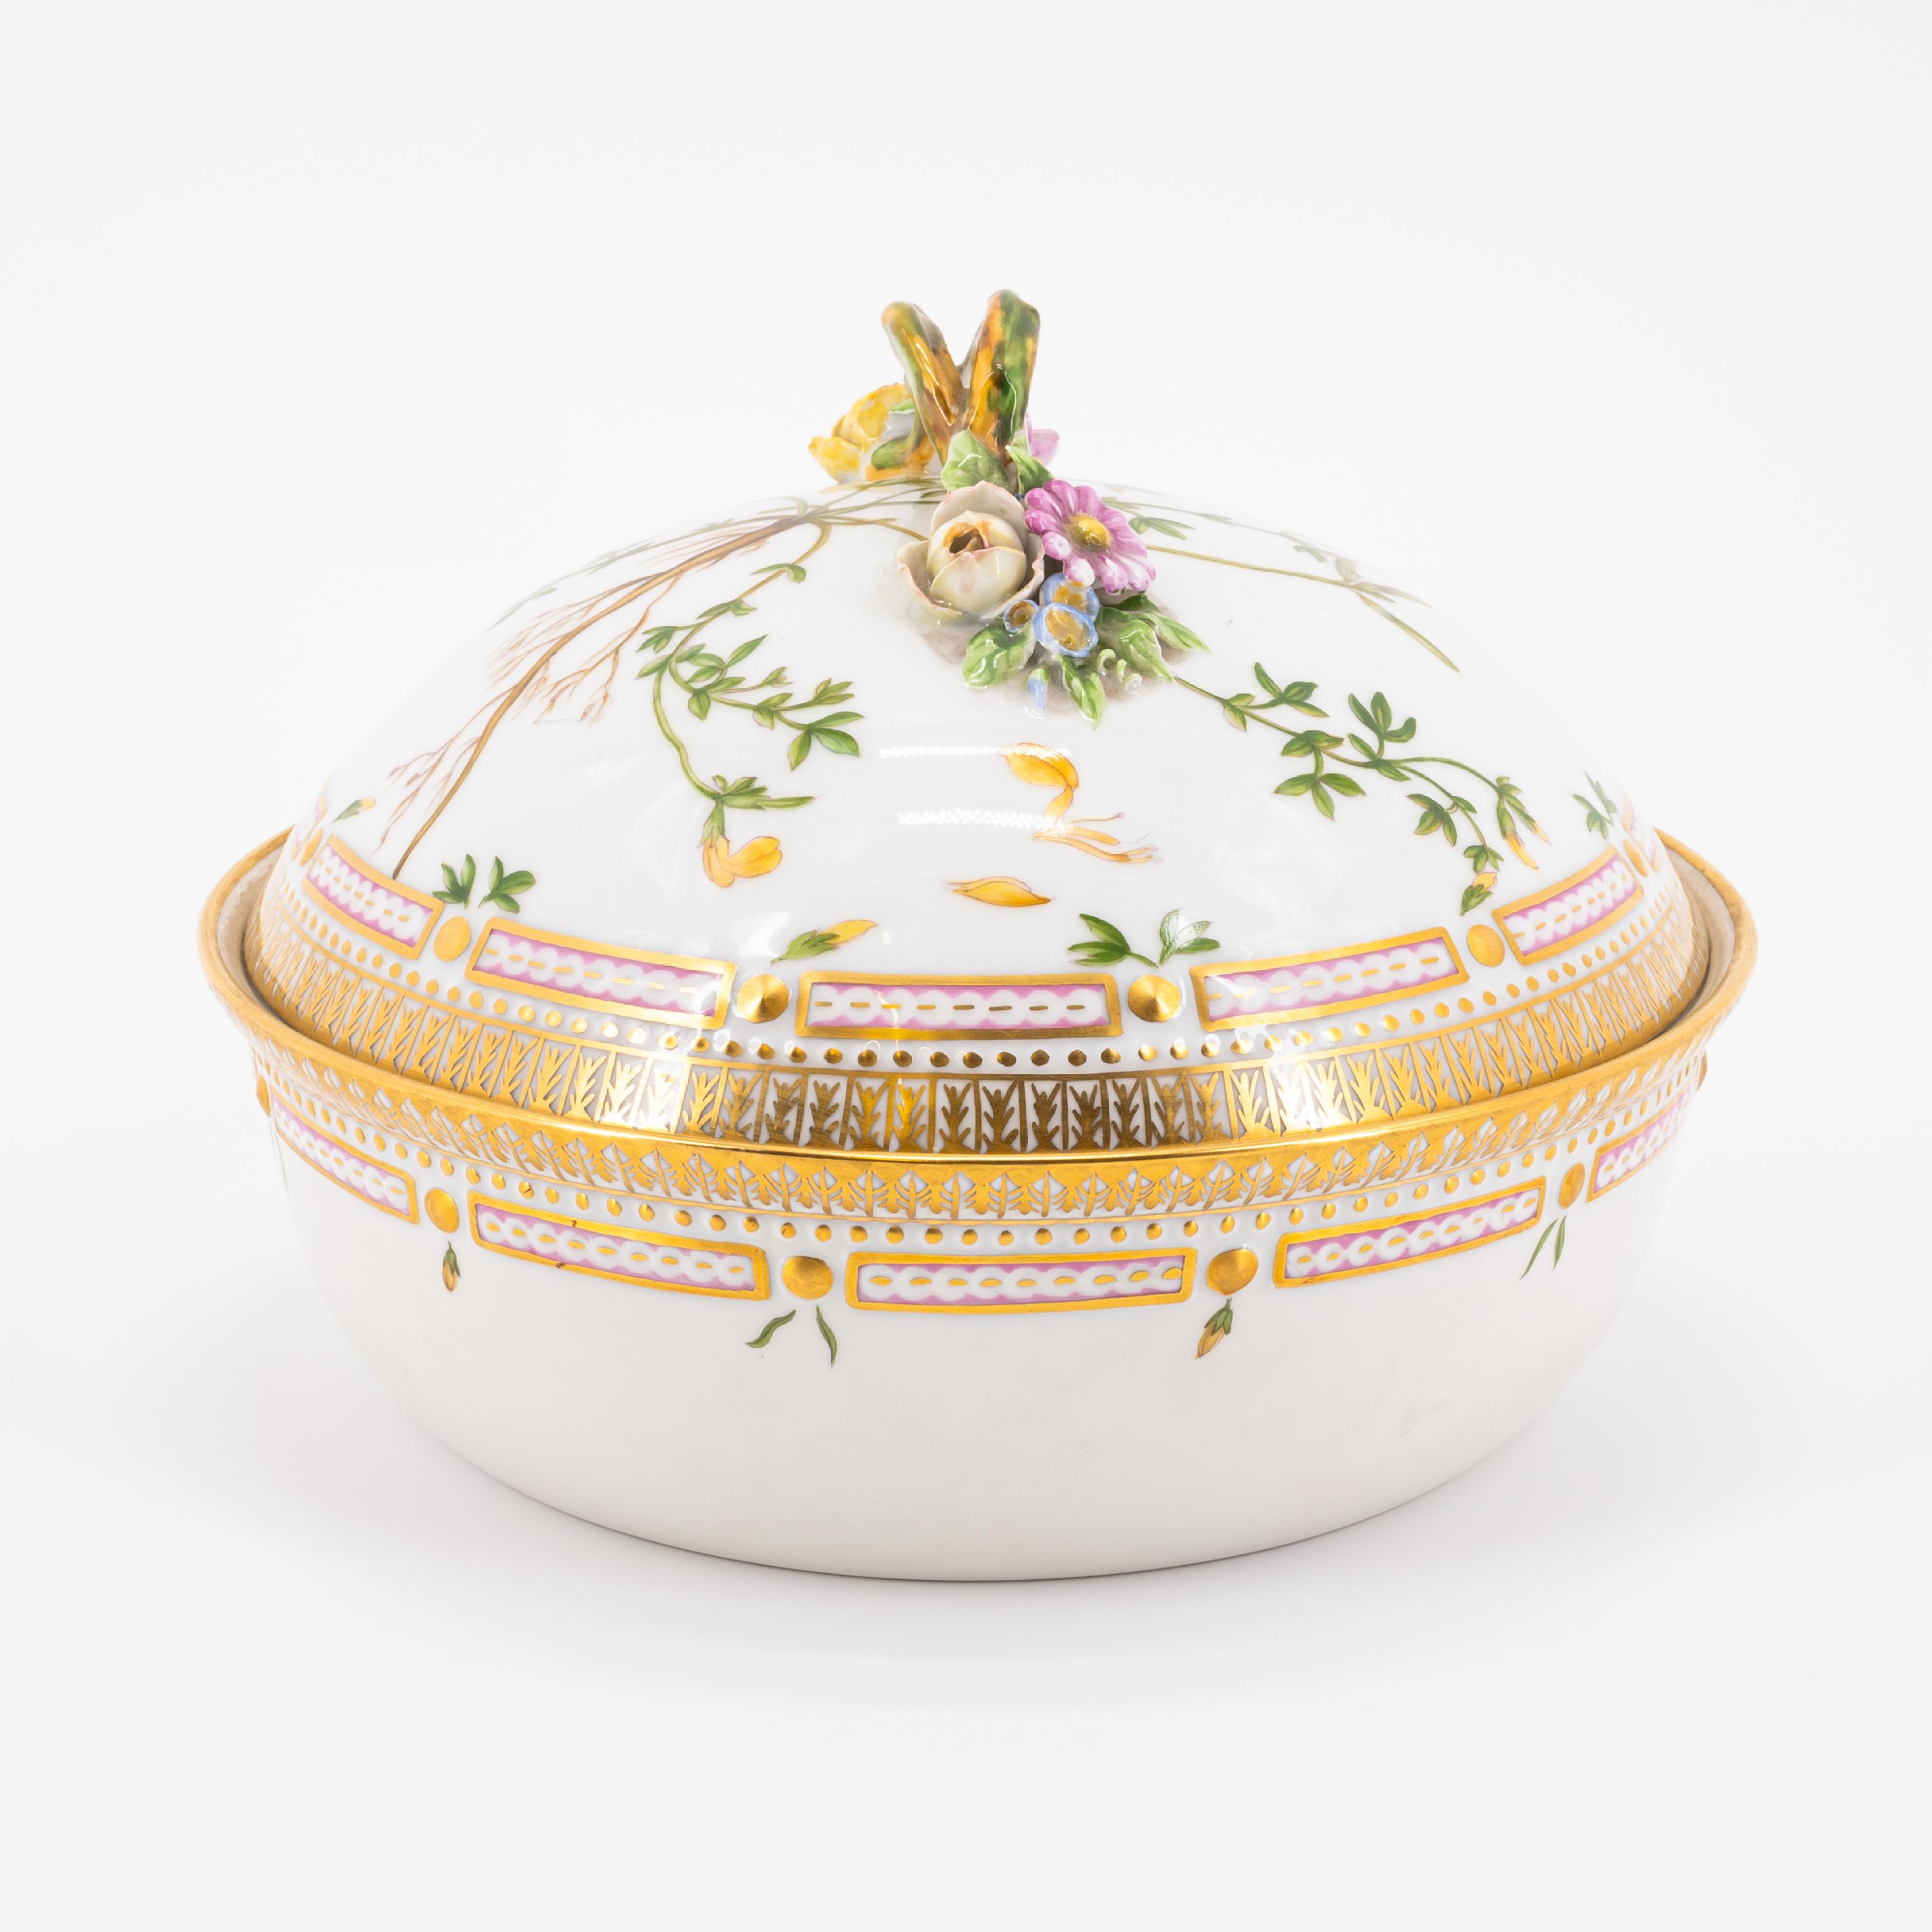 18 PIECES FROM A PORCELAIN DINNER SERVICE 'FLORA DANICA' - Image 17 of 26